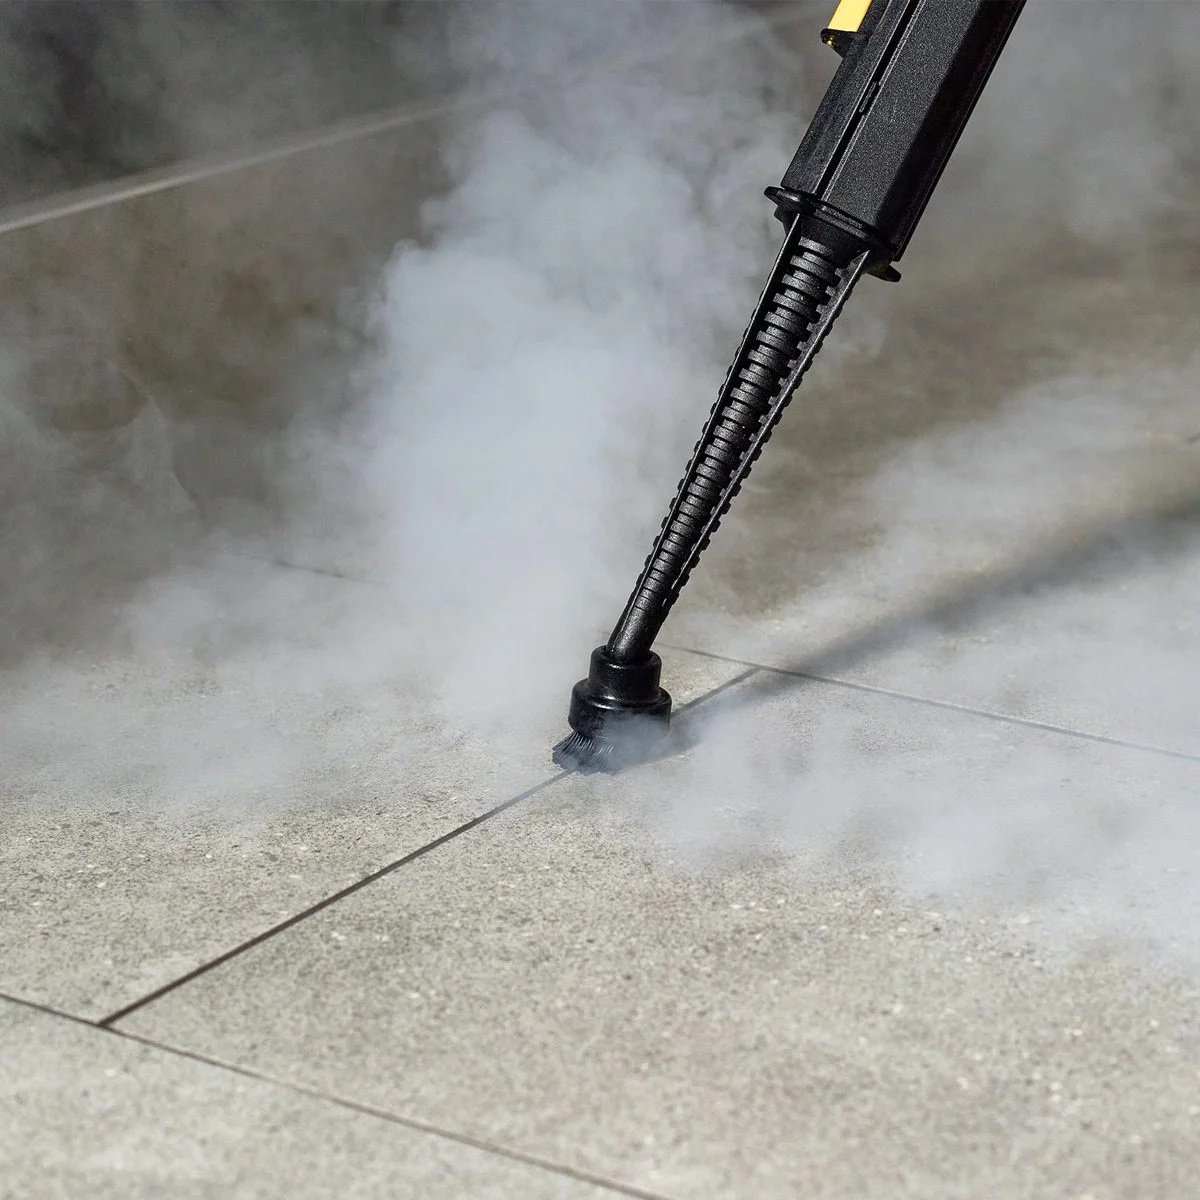 Cleaning Grout With Steam: Everything You Need To Know